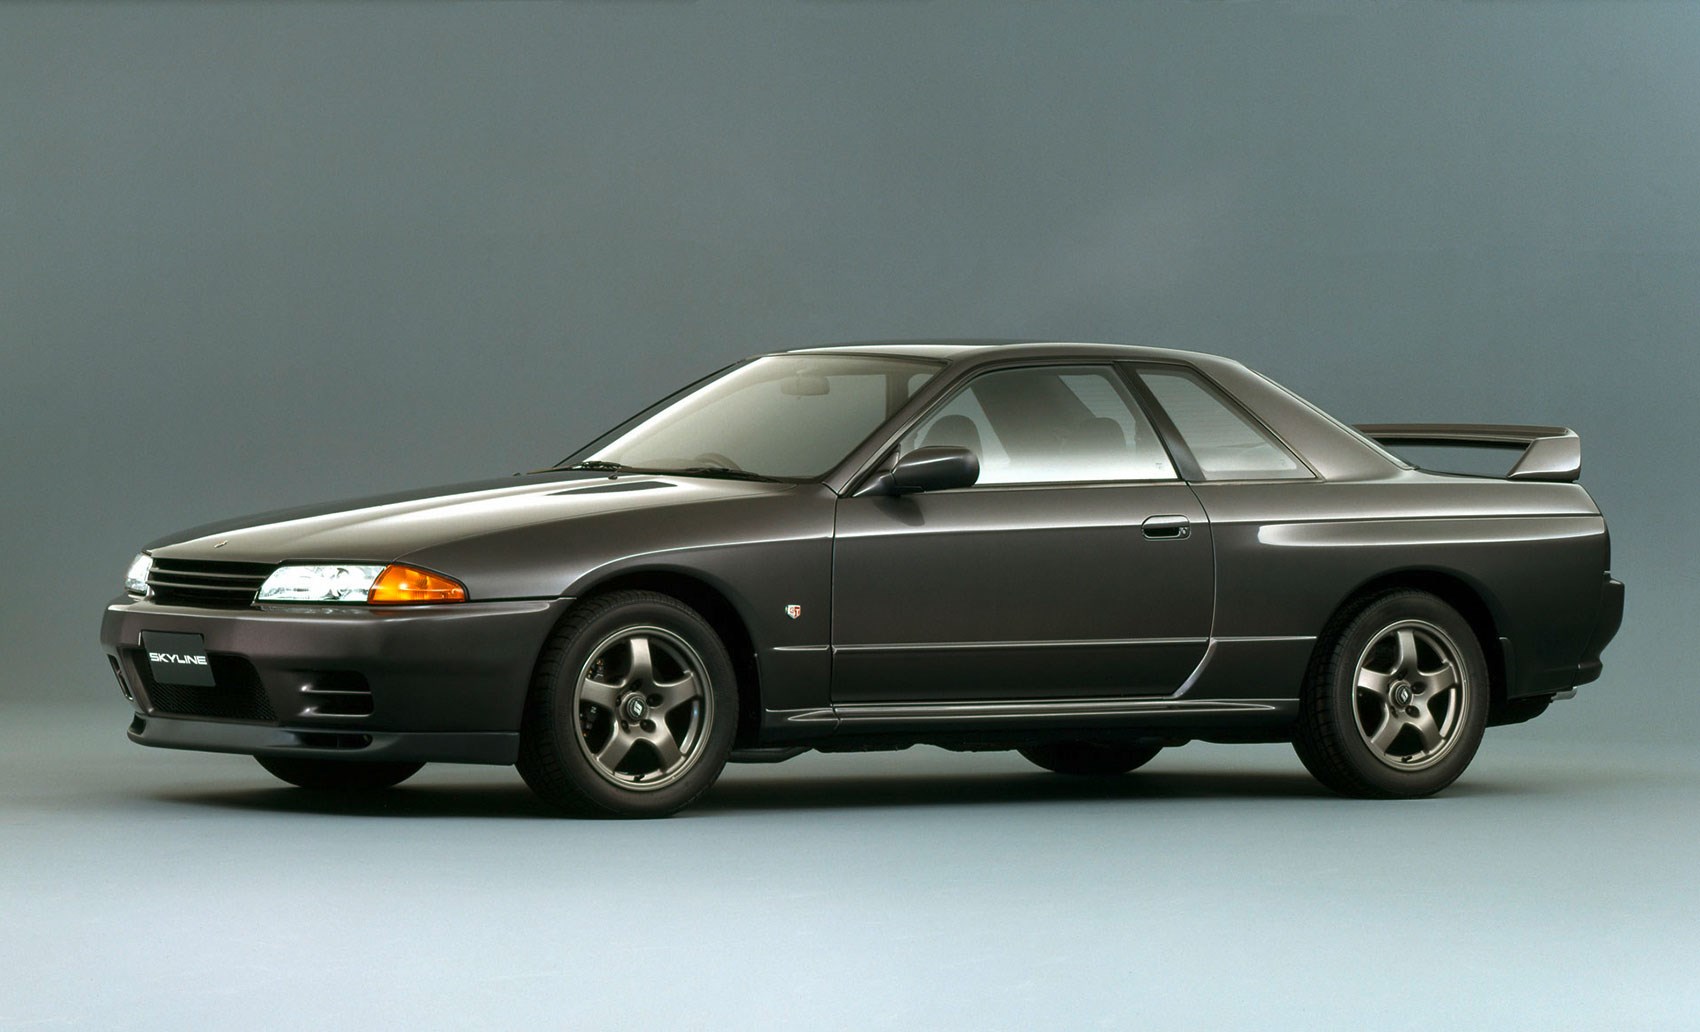 The world's most advanced road car: Nissan Skyline R GT R driven